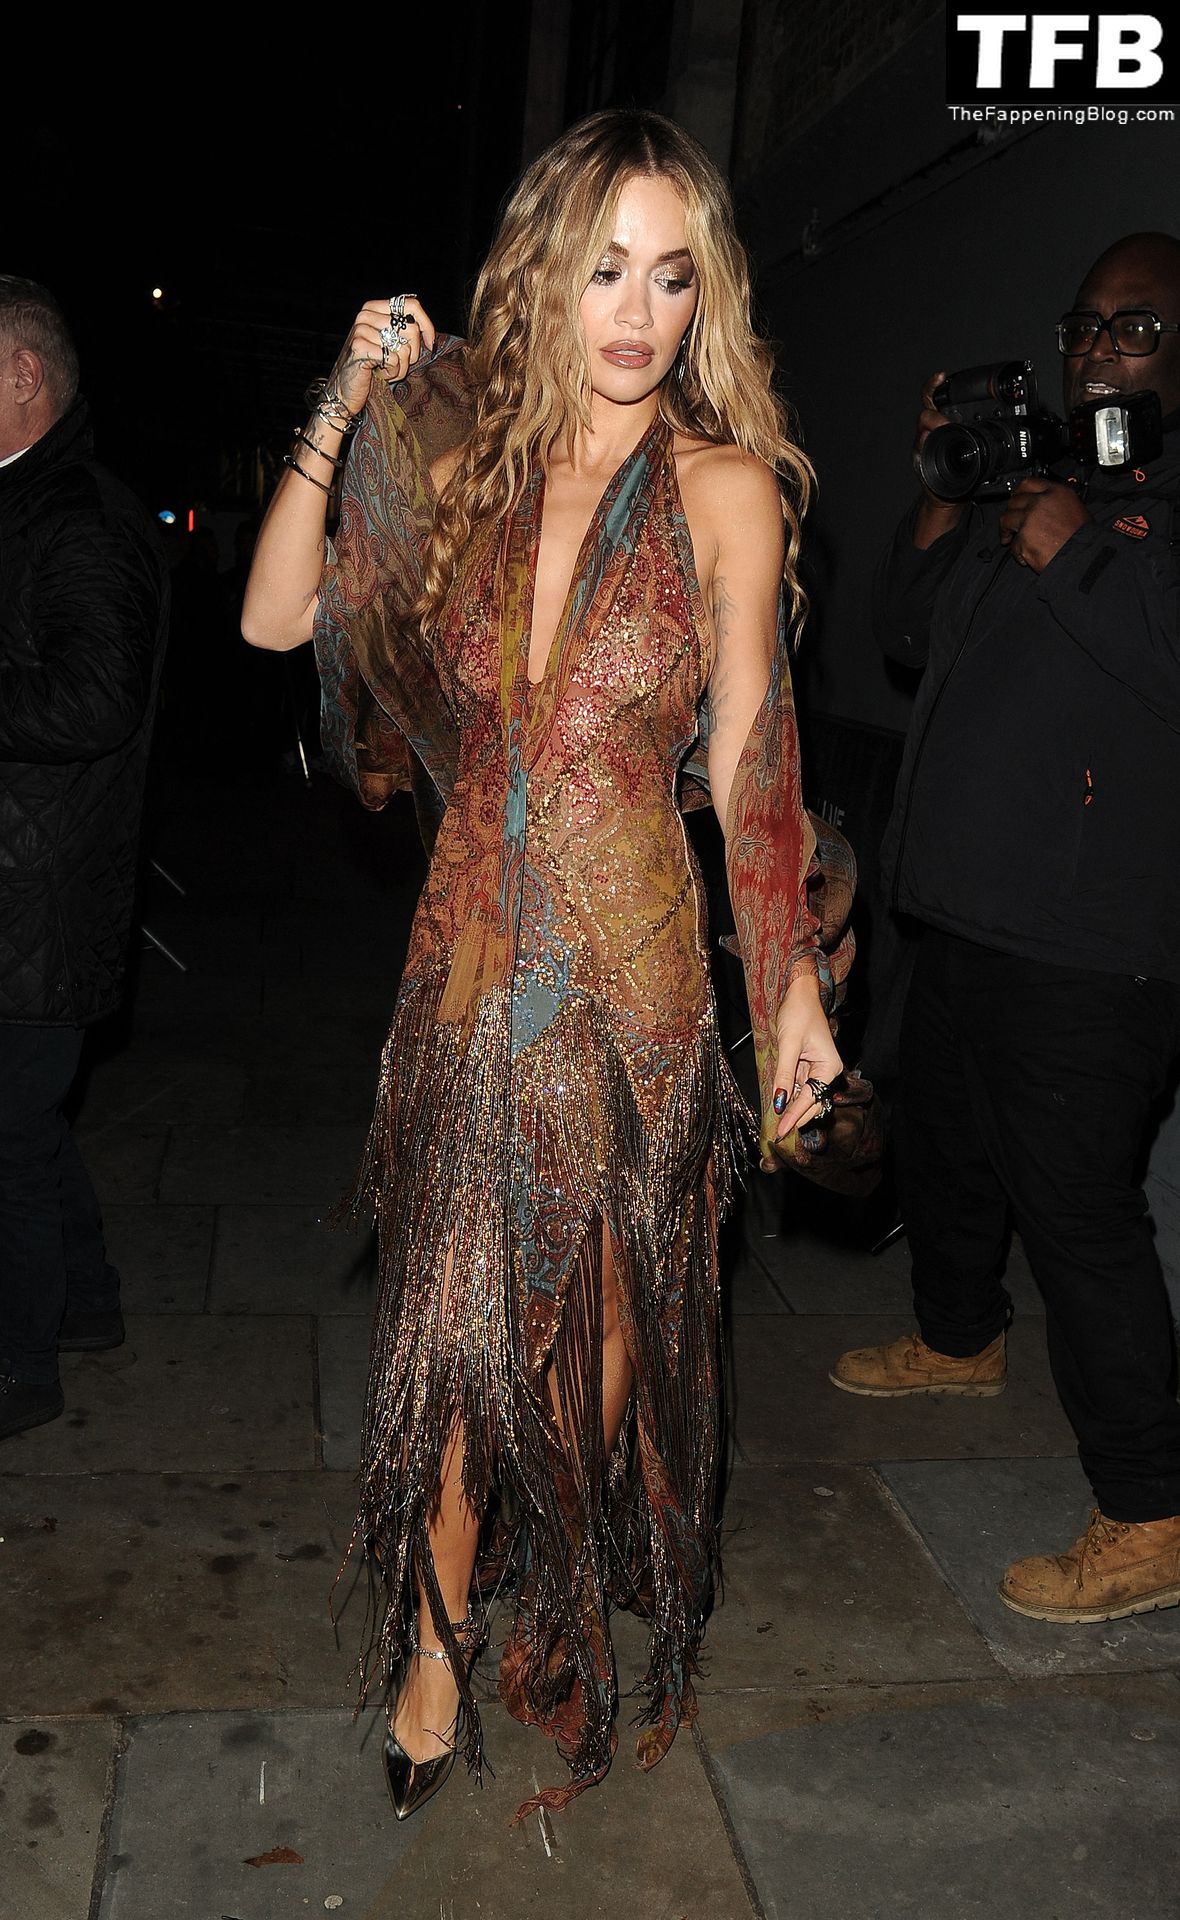 Rita Ora Sexy The Fappening Blog 38 1 - Rita Ora Leaves the Glamour Women Of The Year Awards in London (46 Photos)